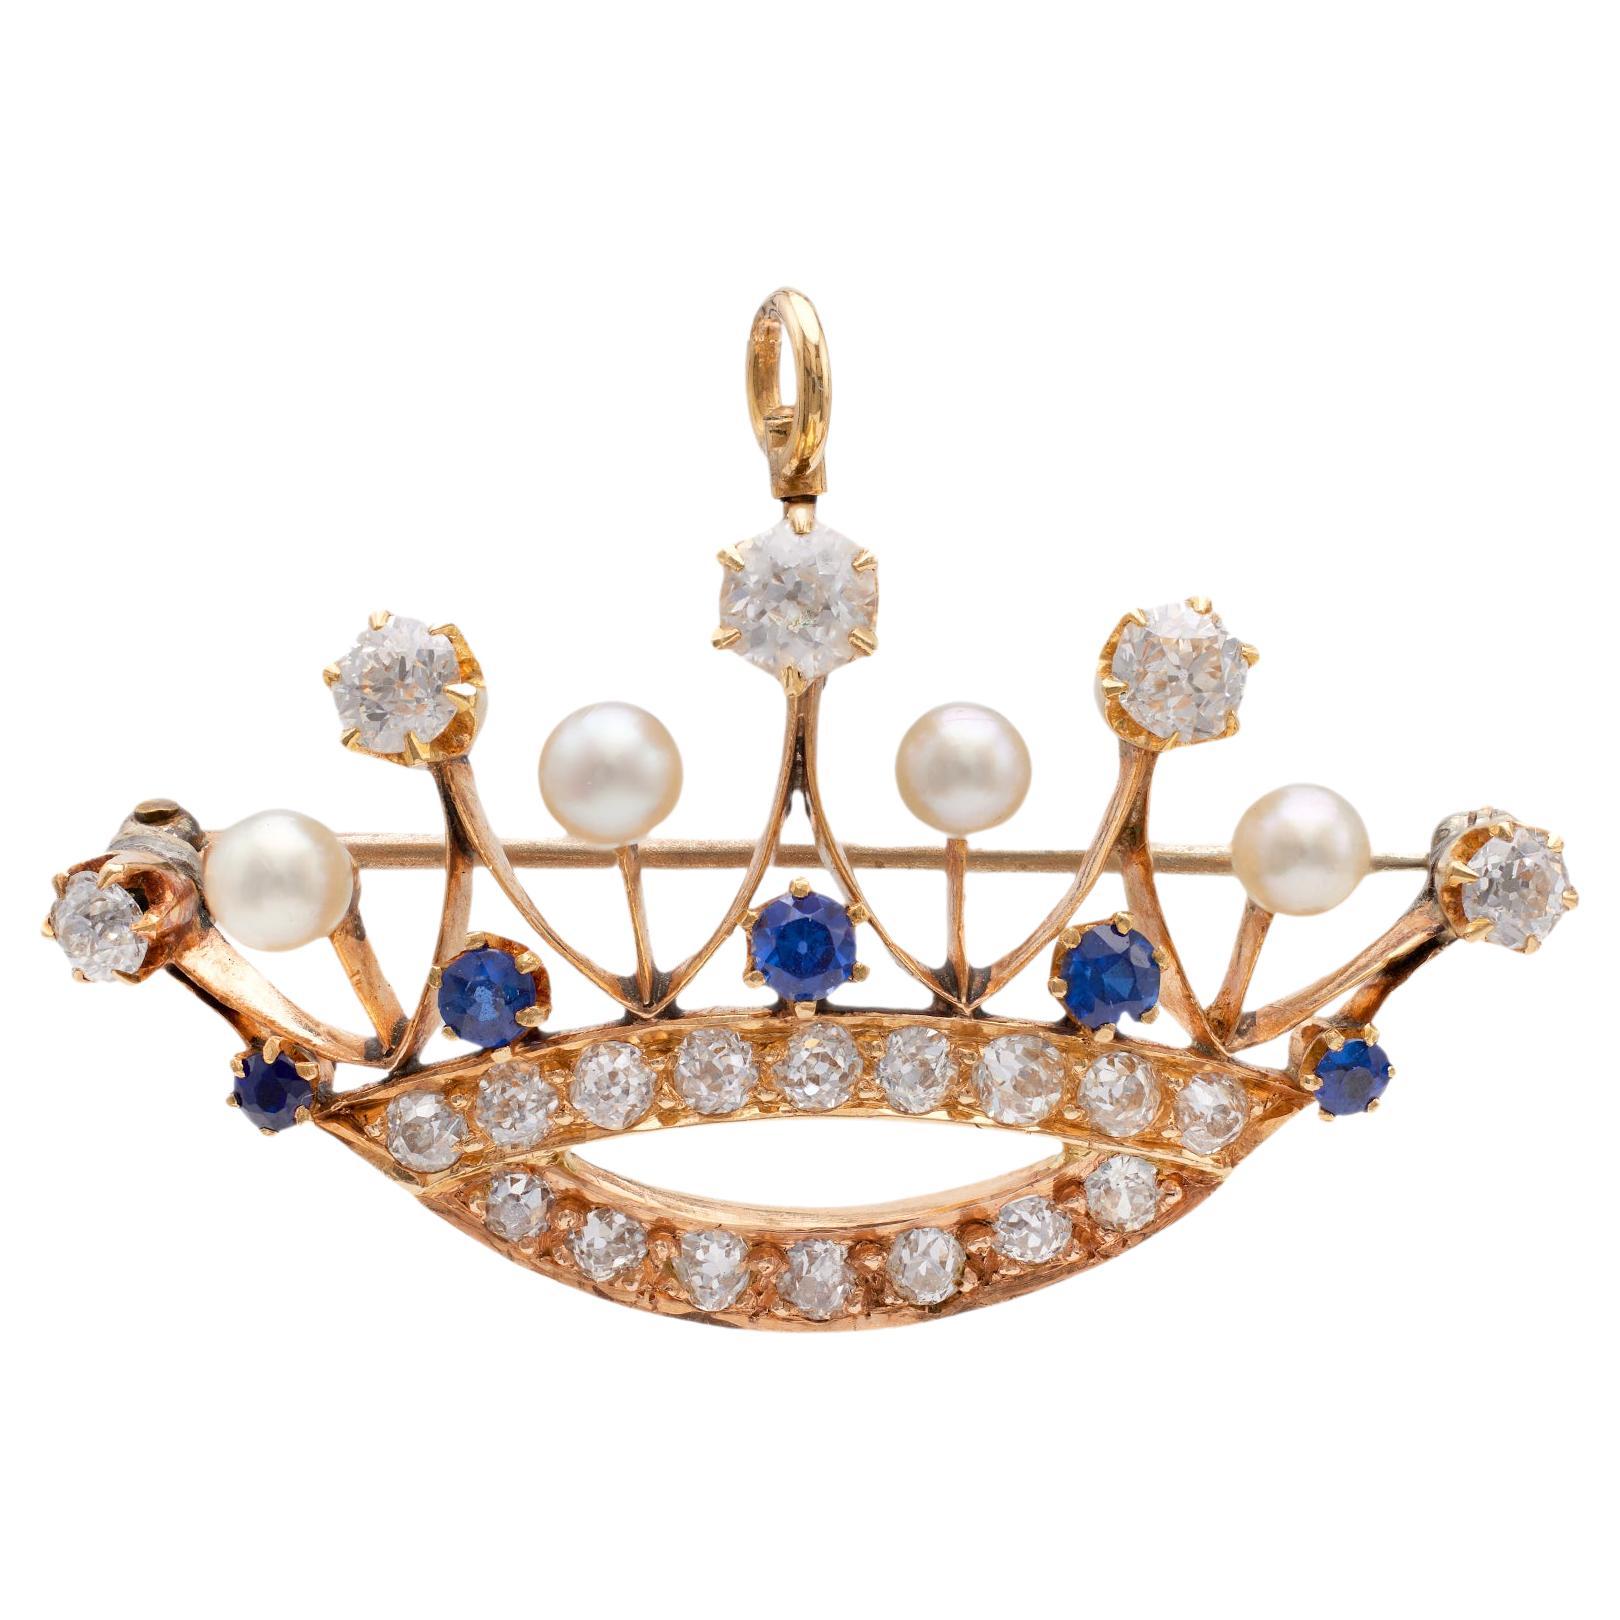 Antique Diamond, Sapphire, and Pearl 14k Yellow Gold Crown Brooch